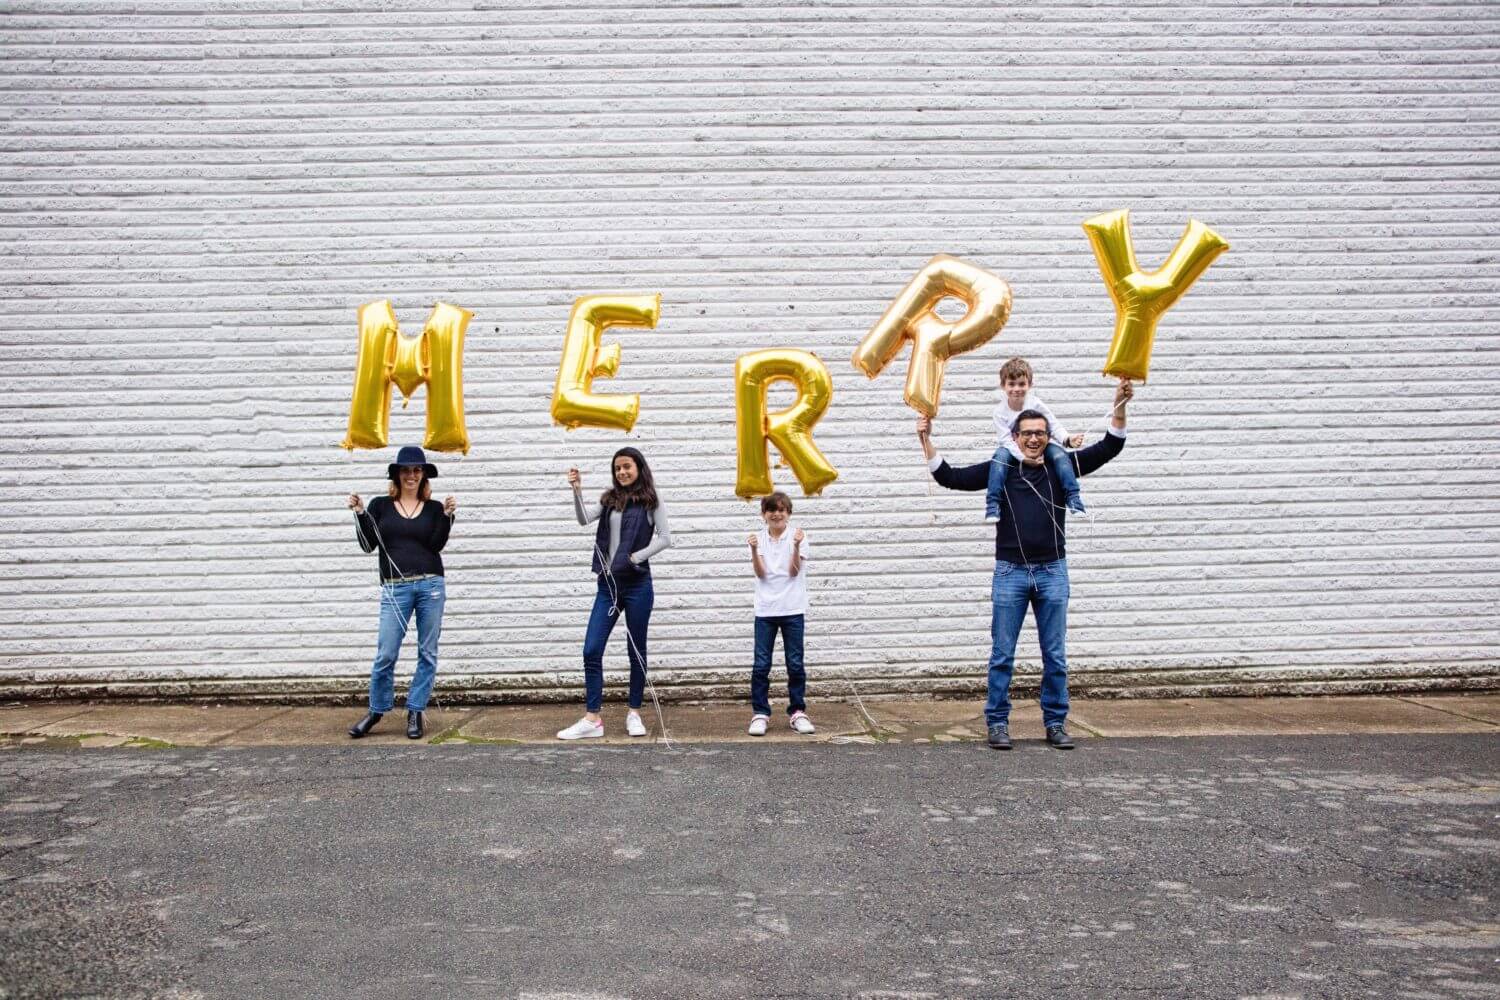 merry everything make your holiday photos stand out